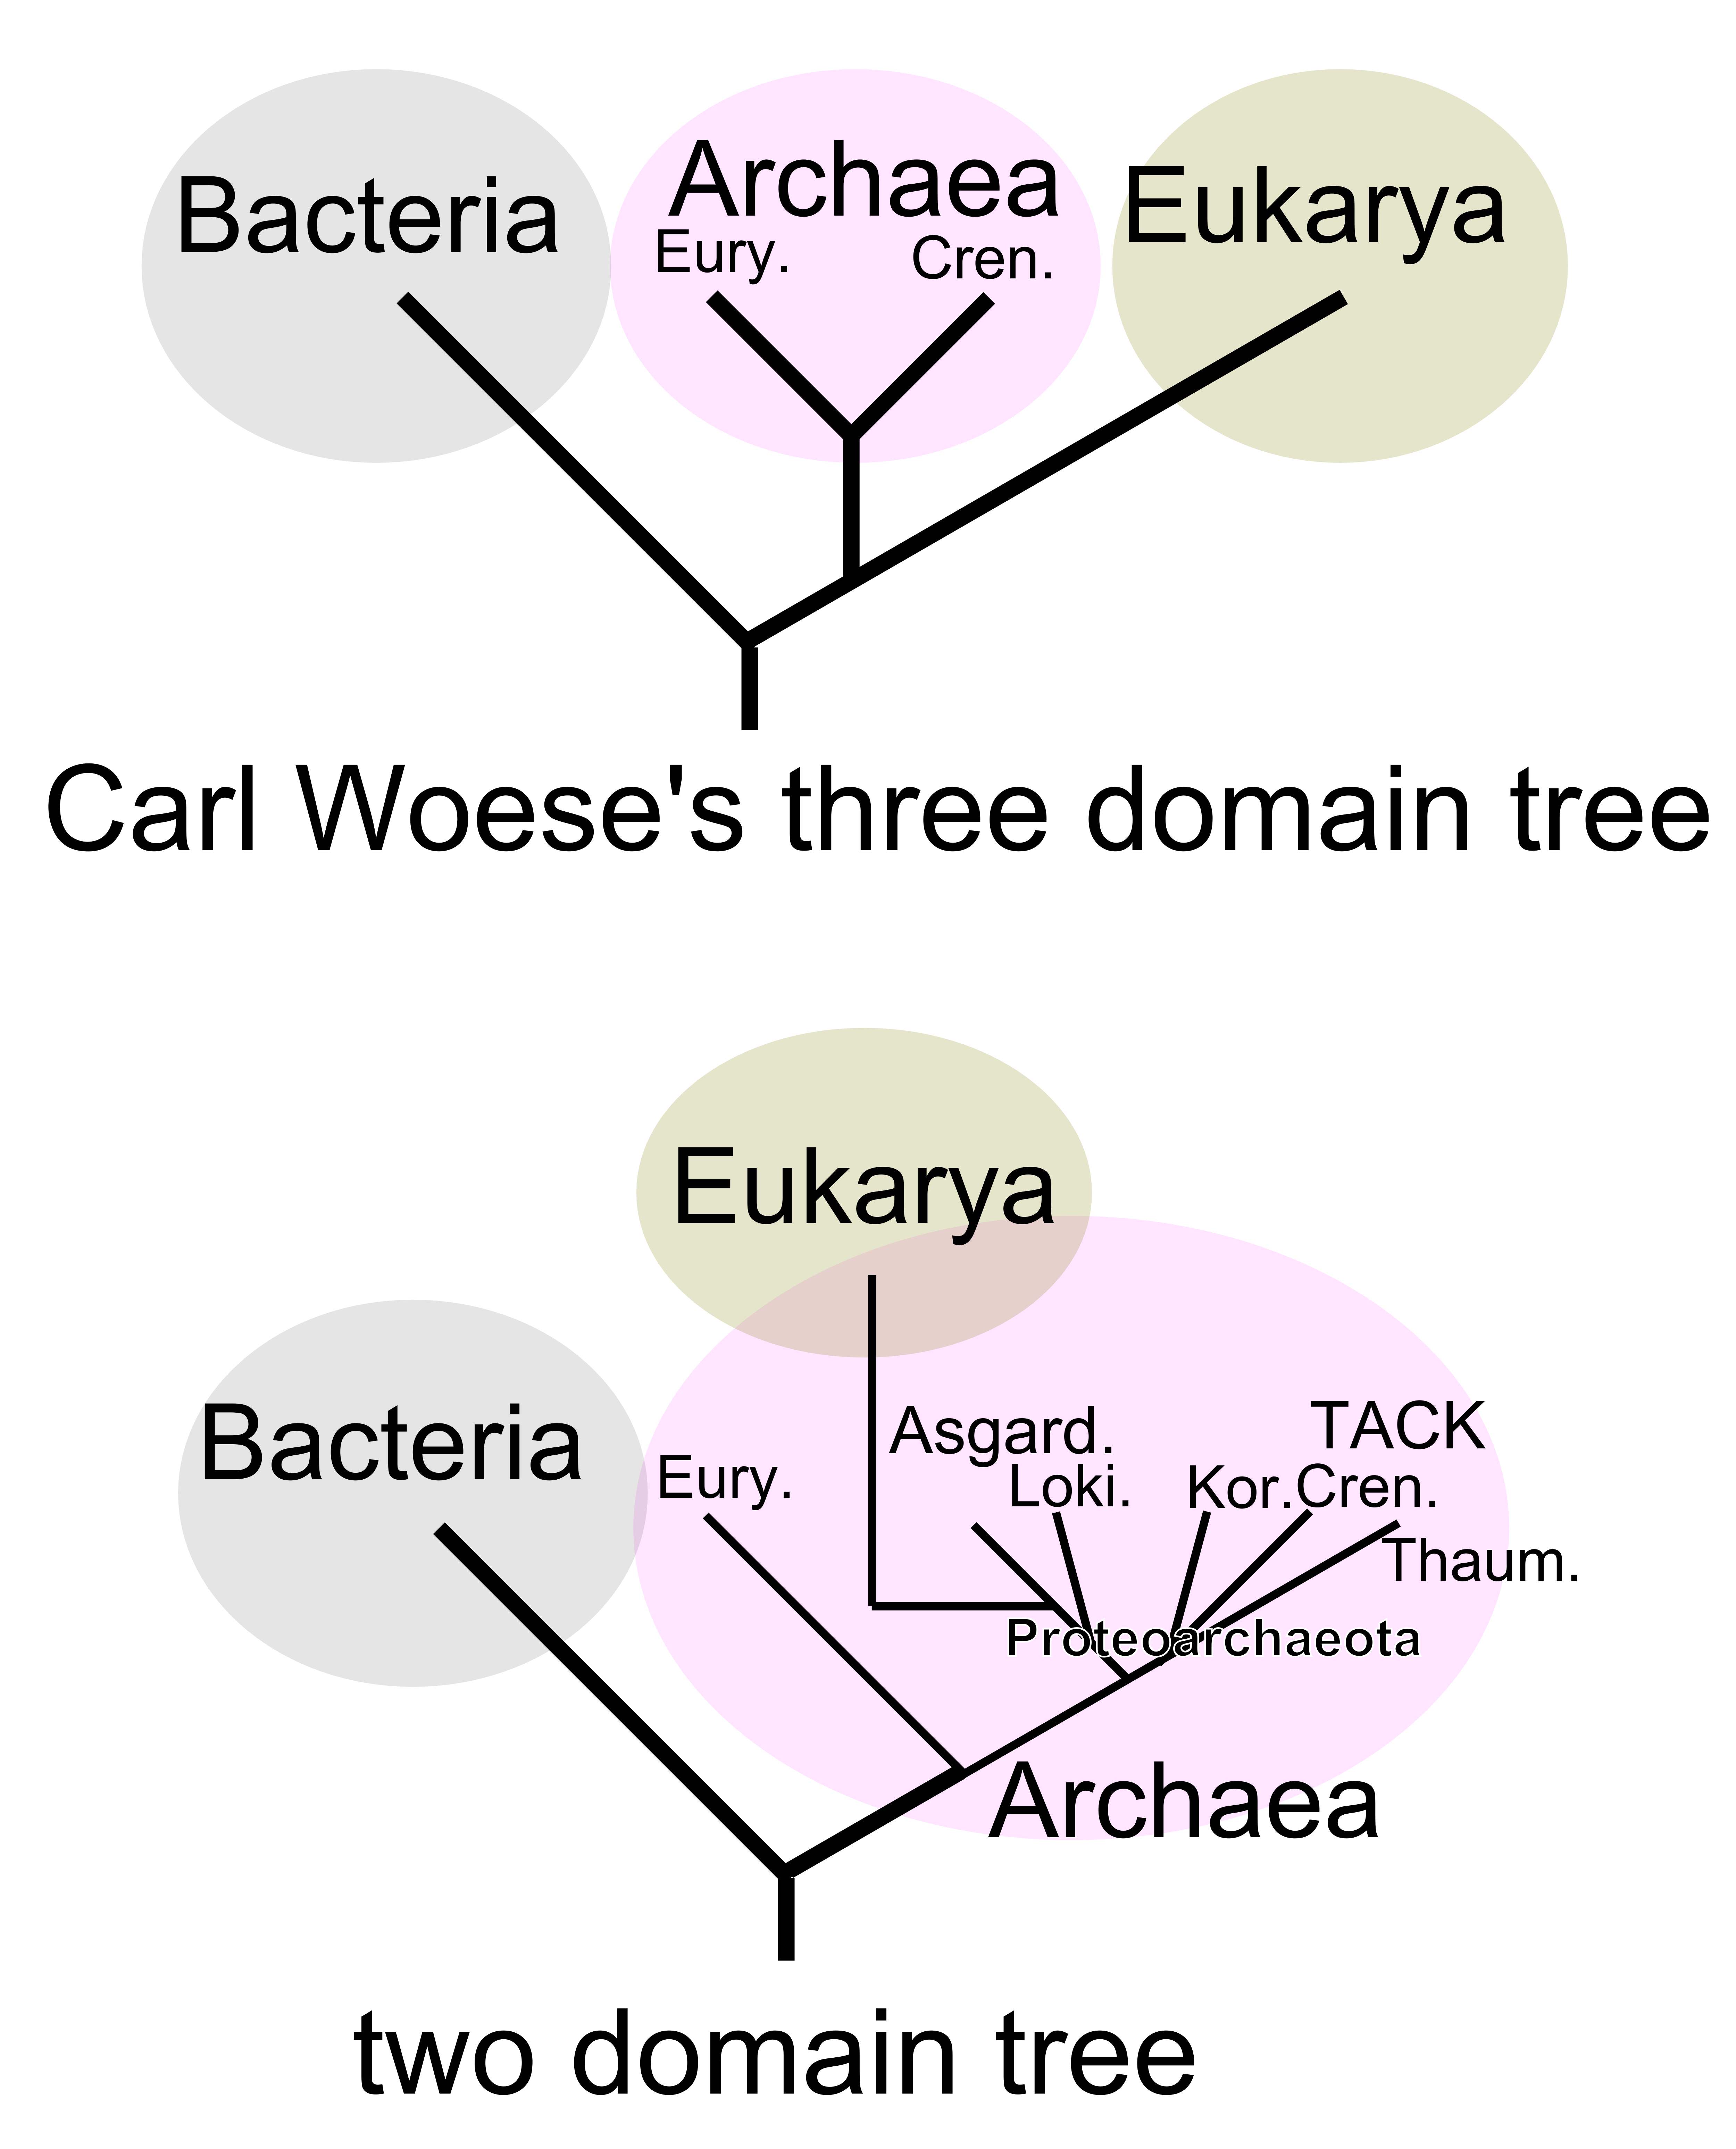 Figure depicting a 2-domain tree of life, in comparison to Woese's 3-domain tree of life. In the 2-domain tree, the eukaryotes are descended from the archaeal domain, rather than being a sister domain.